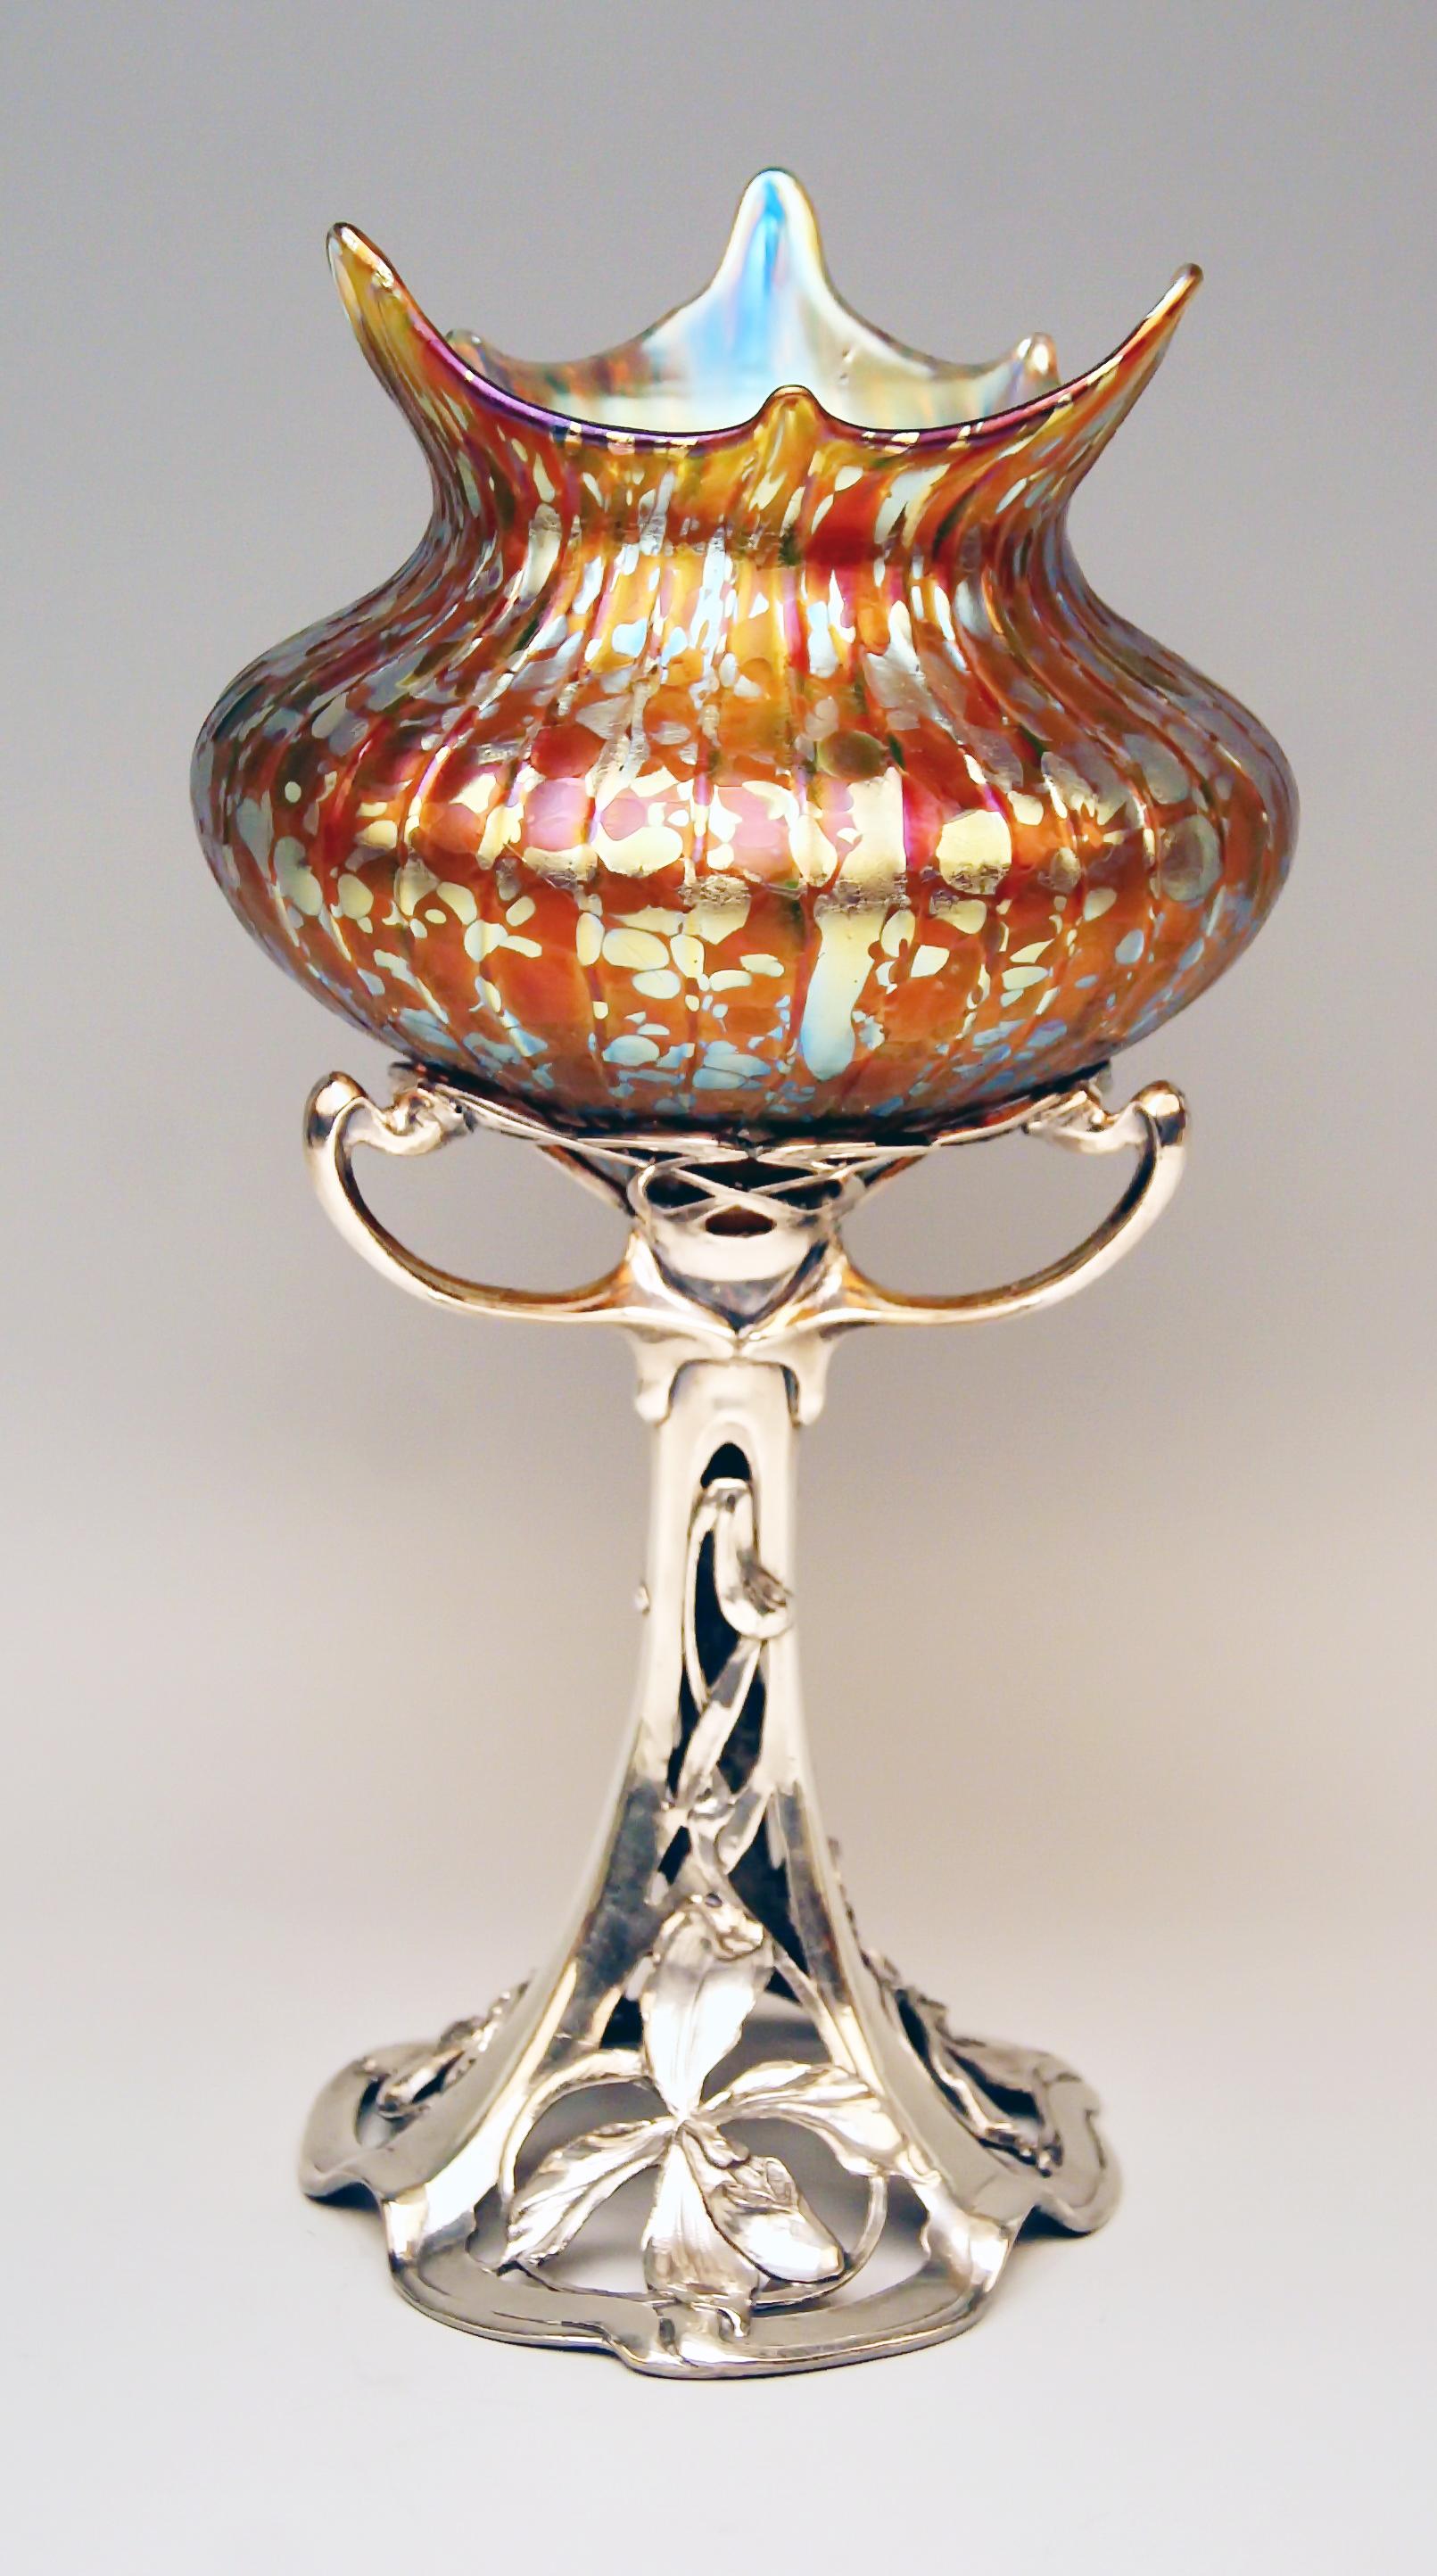 Gorgeous Art Nouveau Vase of very rare shape

Made by Loetz (Lötz) Widow Klostermuehle Bohemia, circa 1900
Decor: amber-orange colored type of Papillon
Form: round as well as bellied body with scalloped mouth and silver plated